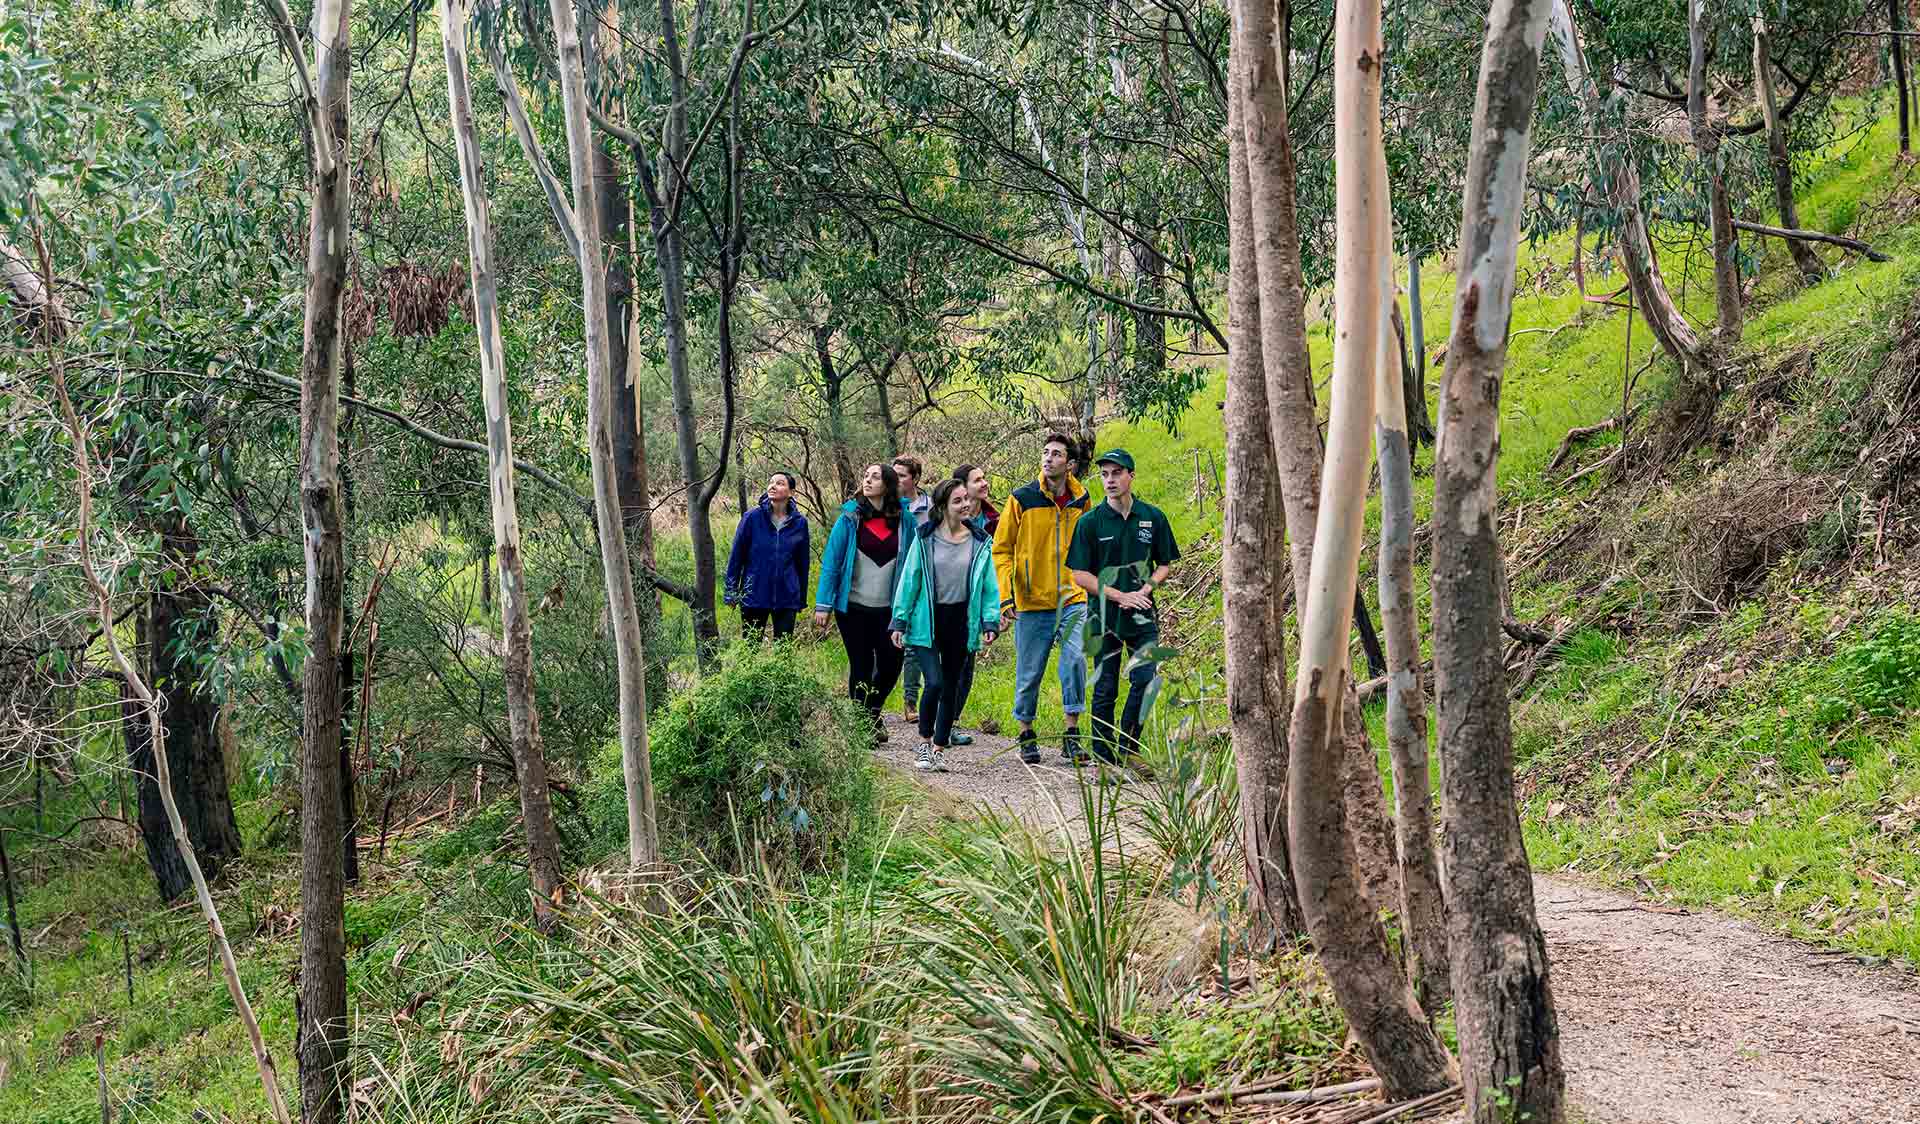 A ground take a volunteer led tour through the Flying Fox environments on the banks of the Yarra River in Yarra Bend Park